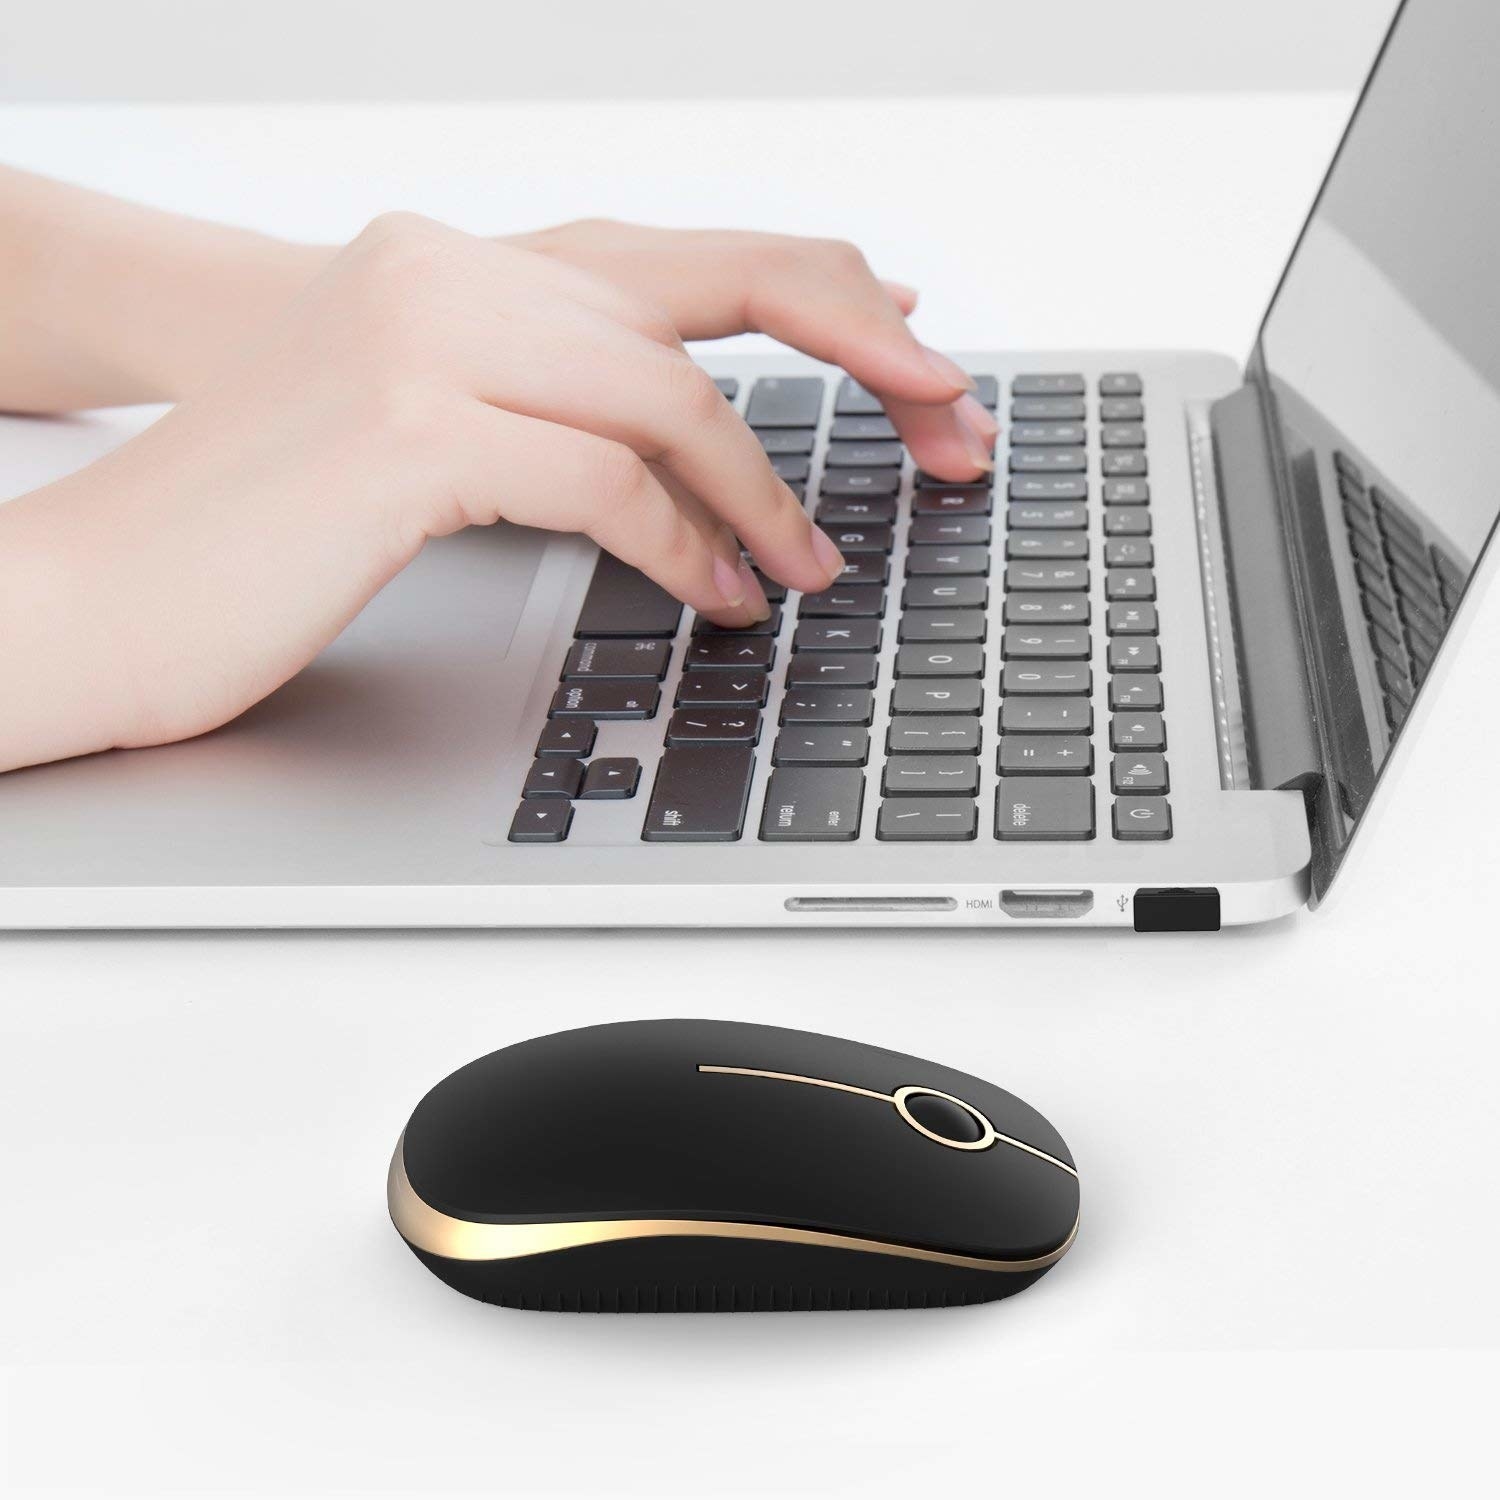 A laptop with a wireless mouse beside it